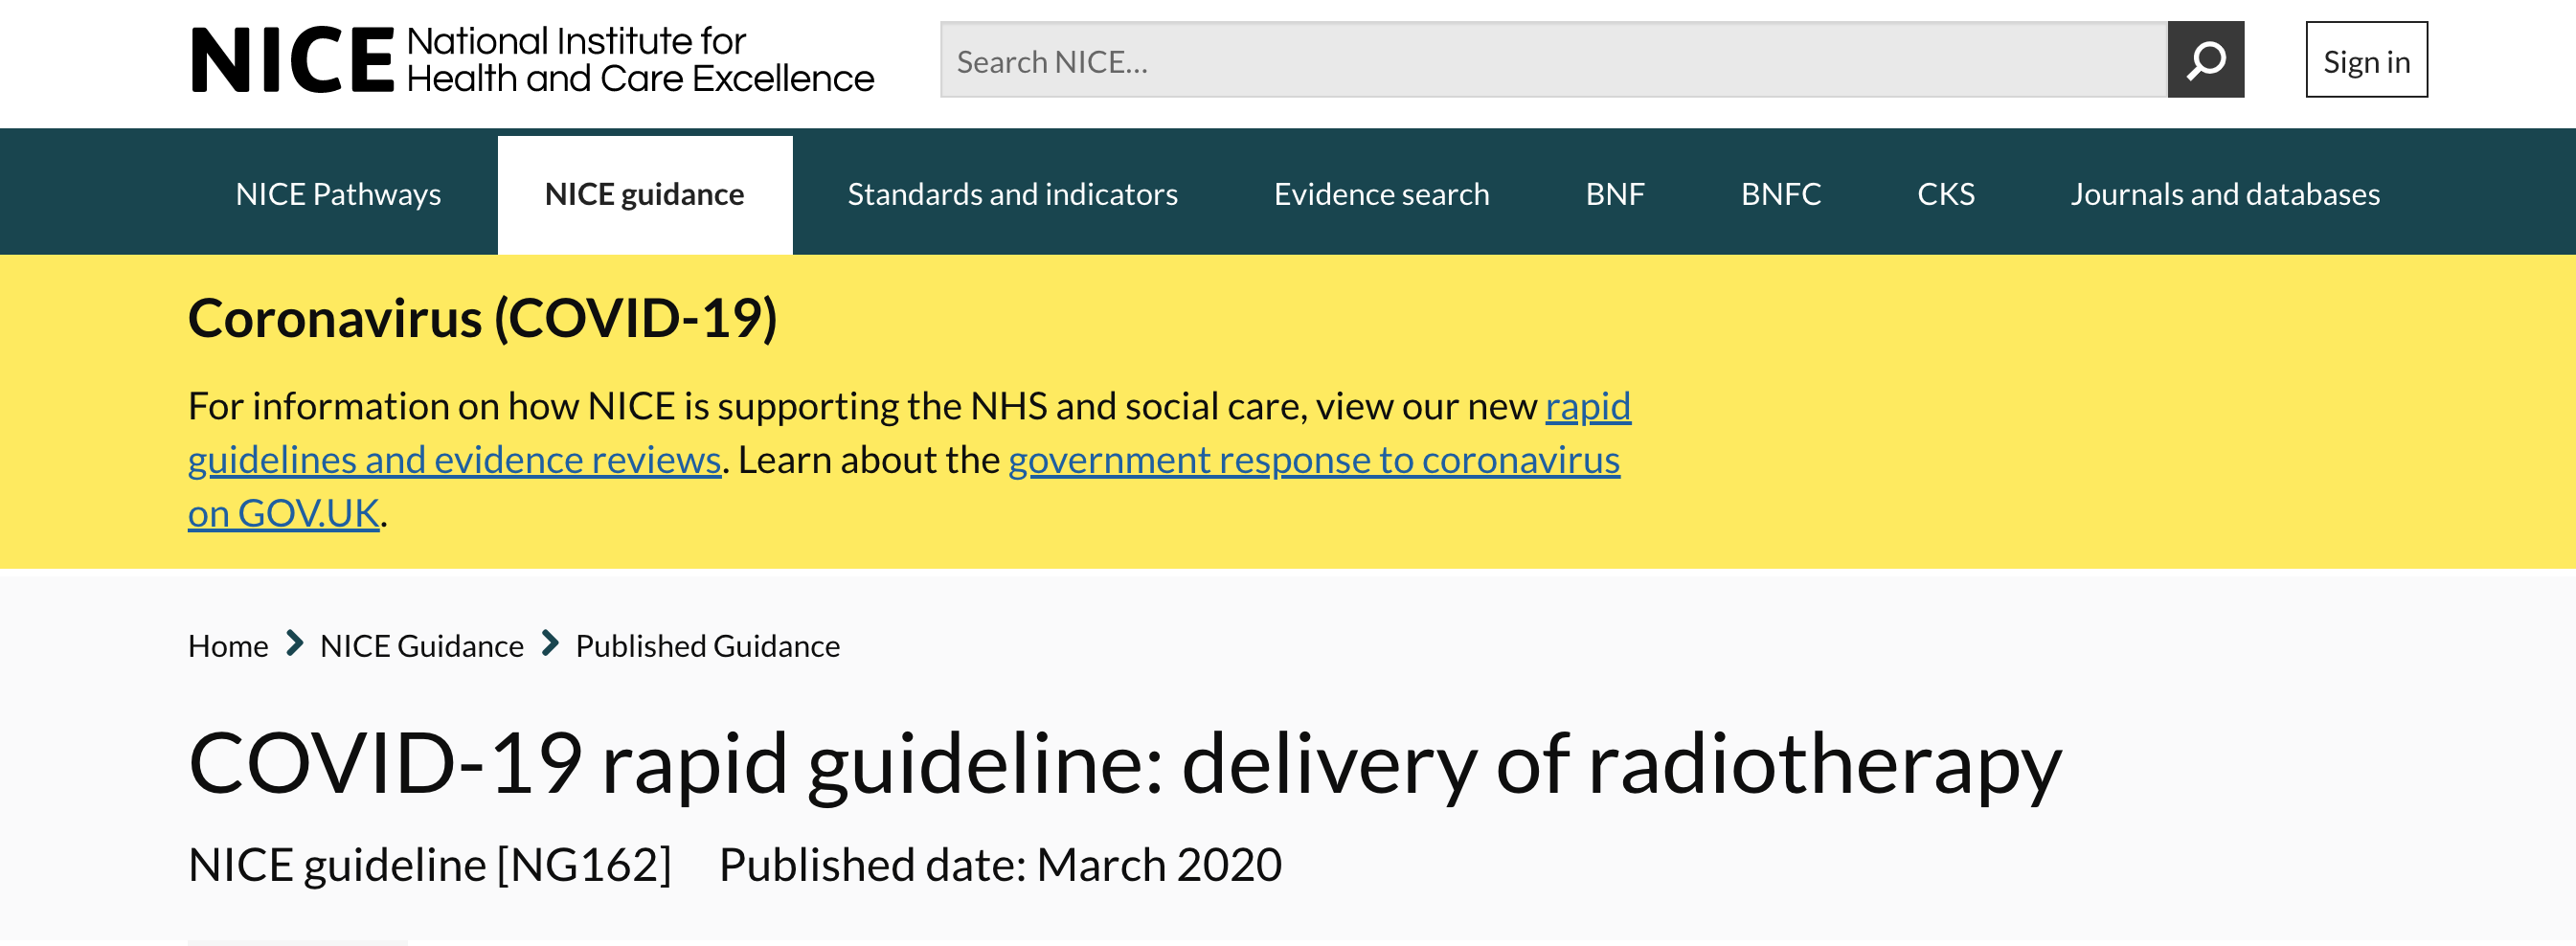 COVID-19 rapid guideline: delivery of radiotherapy - NICE Guidance featured image